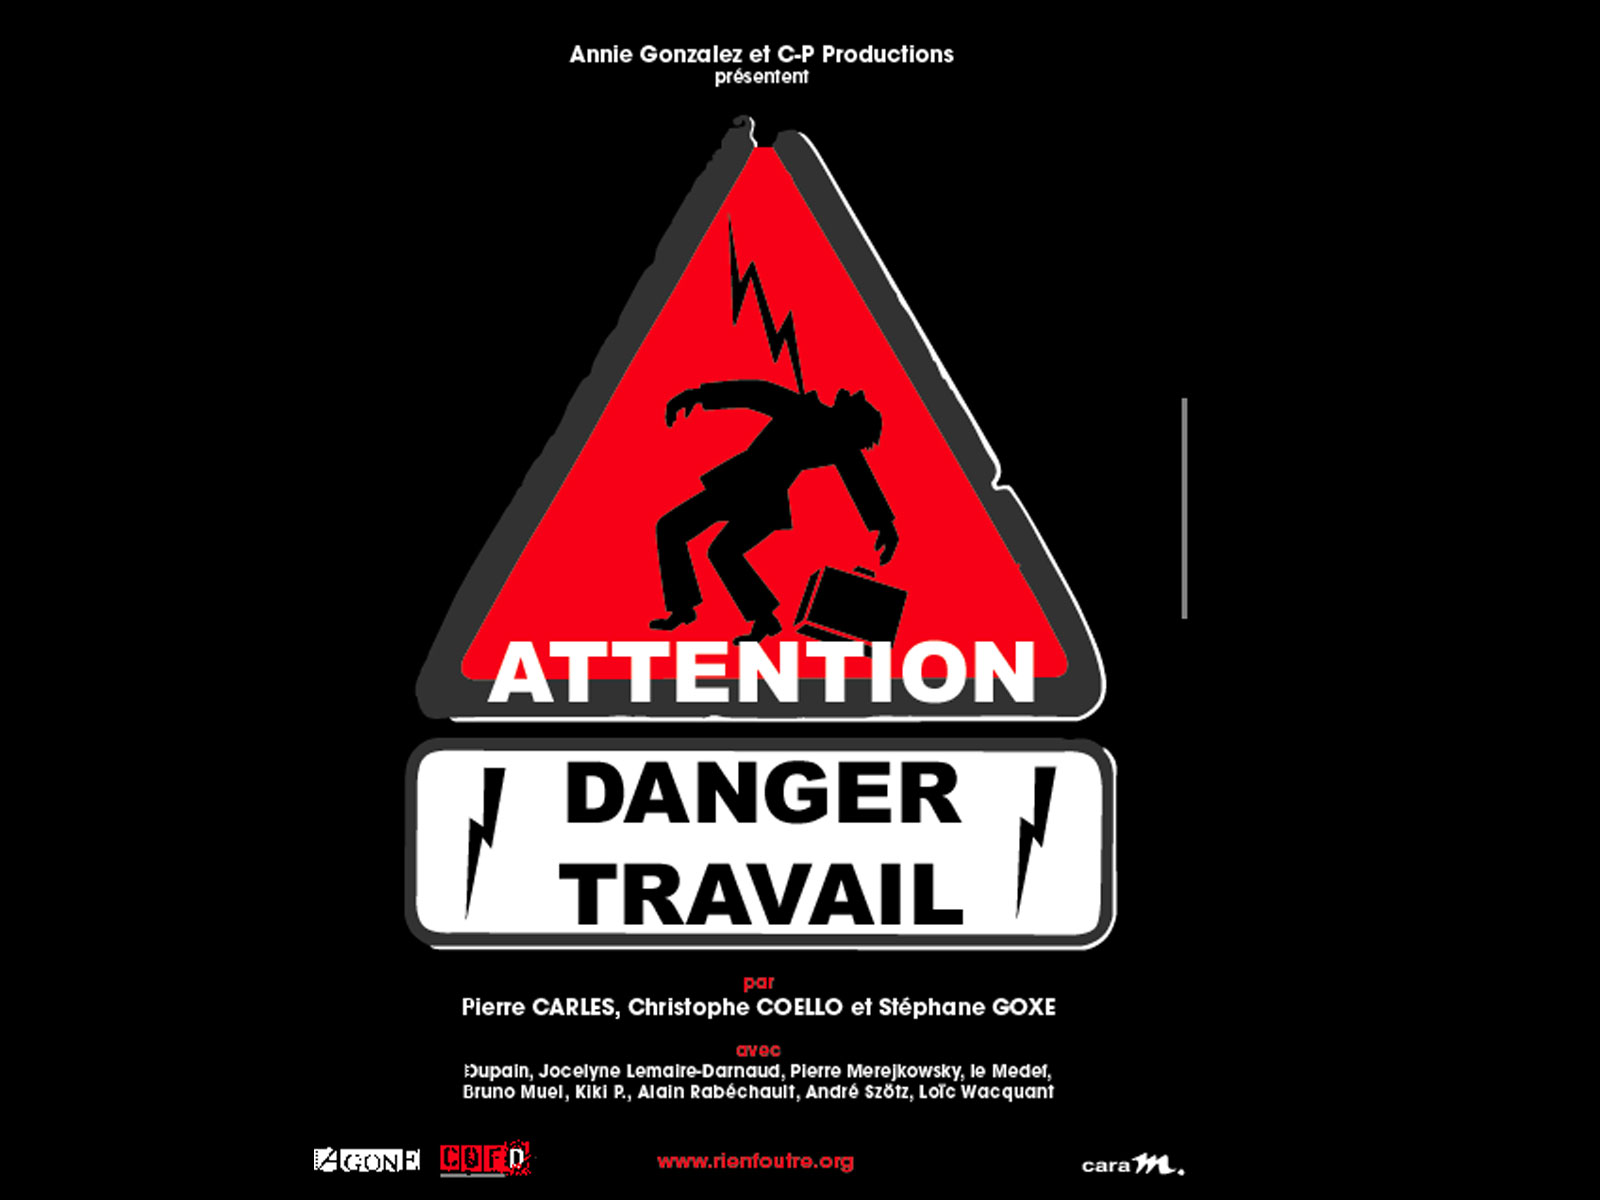 Attention danger travail - © CP productions